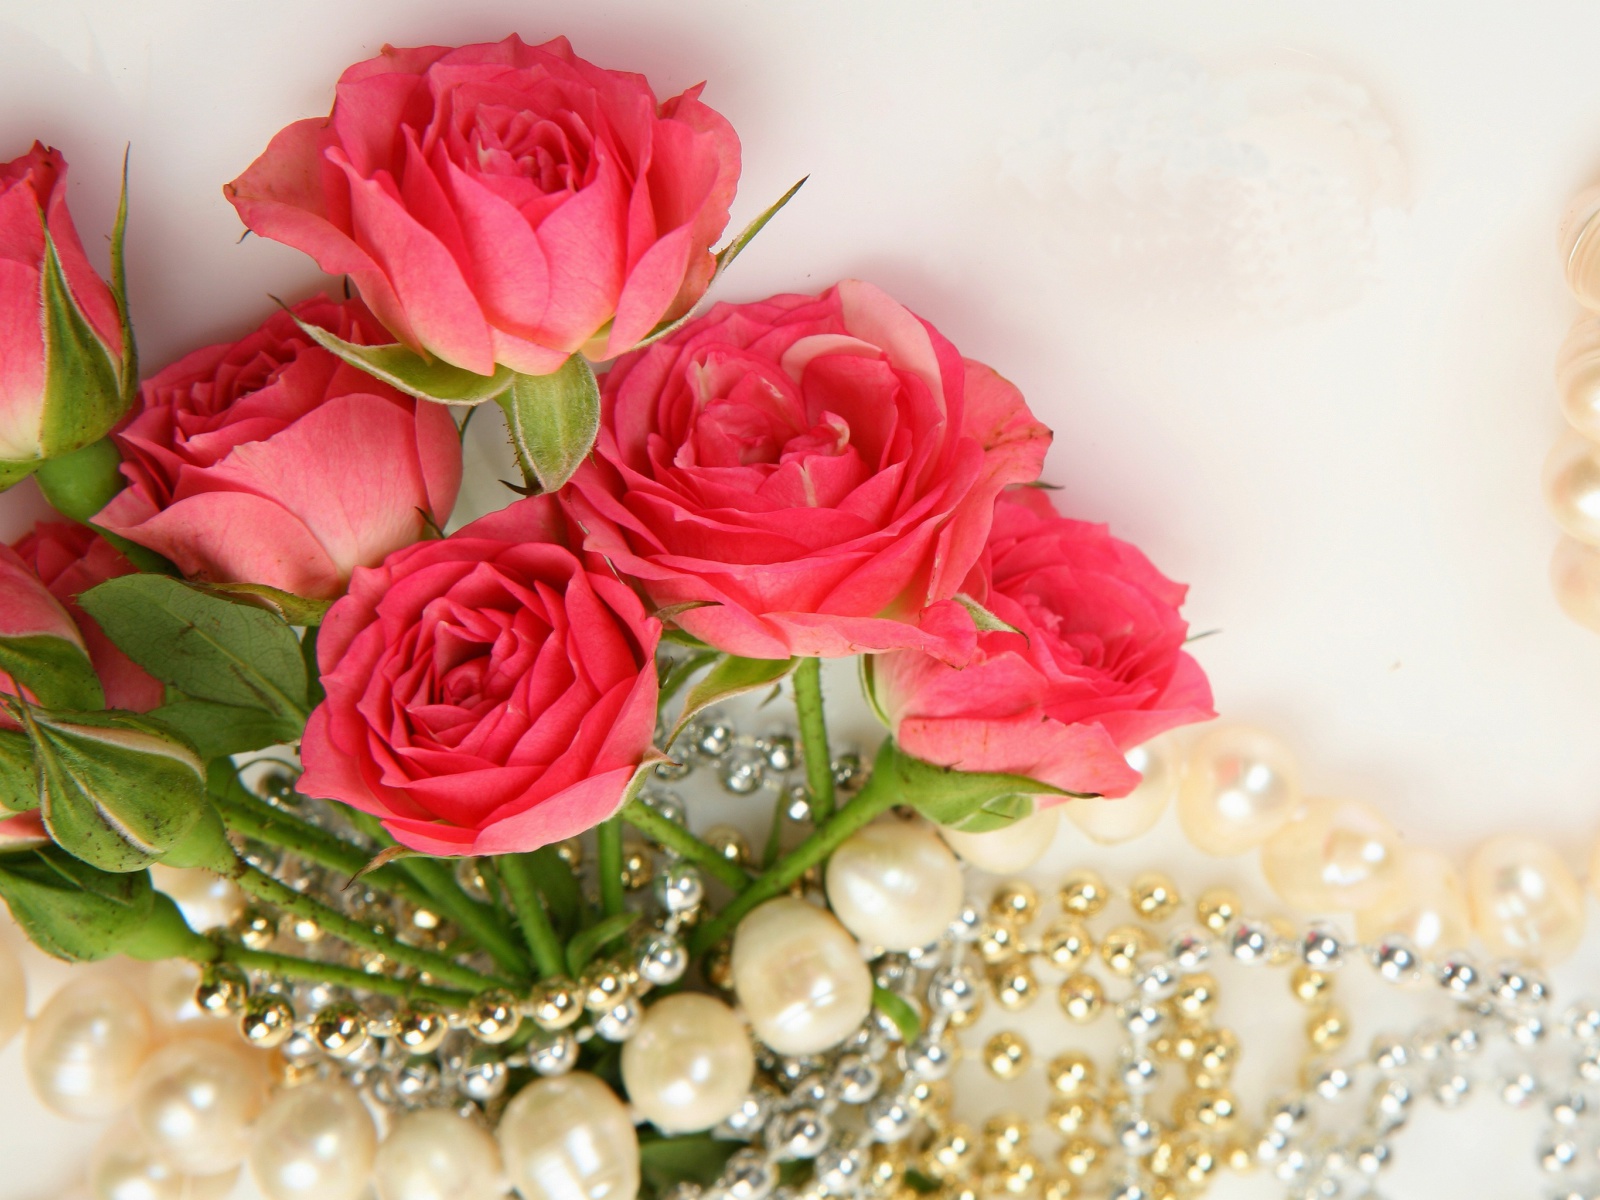 Das Necklace and Roses Bouquet Wallpaper 1600x1200